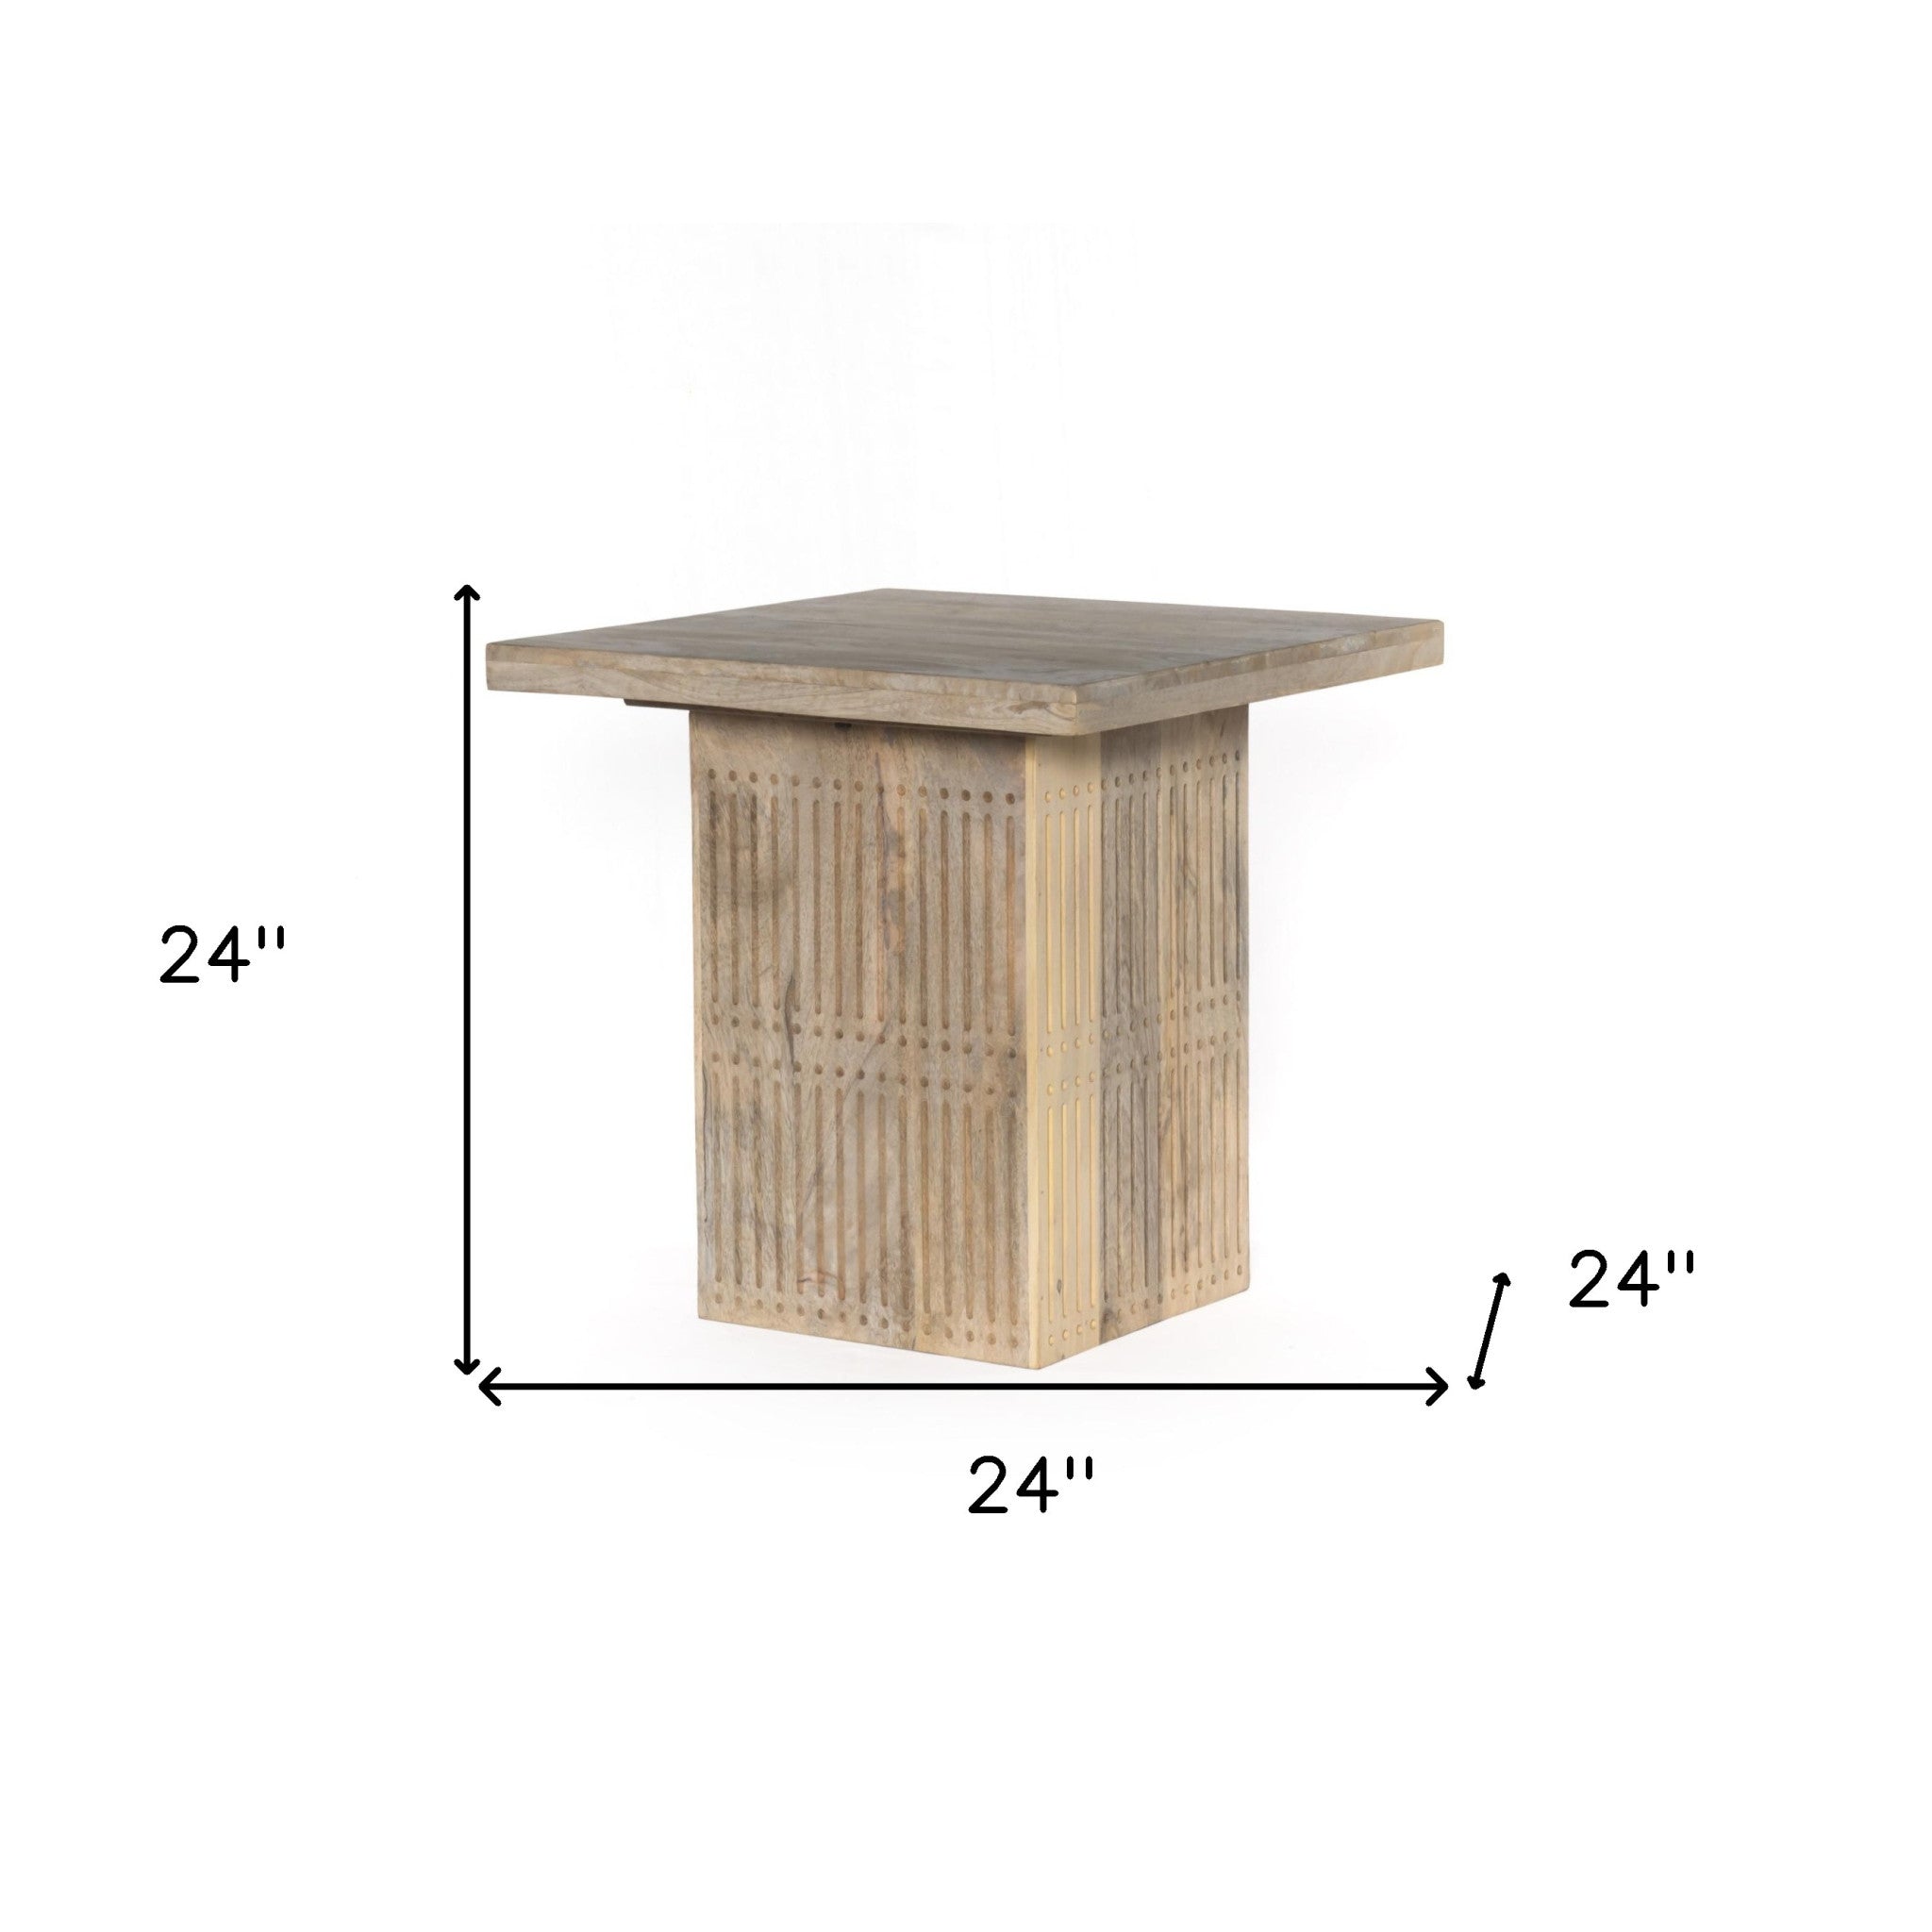 24" Brushed Ivory Solid Wood Square End Table